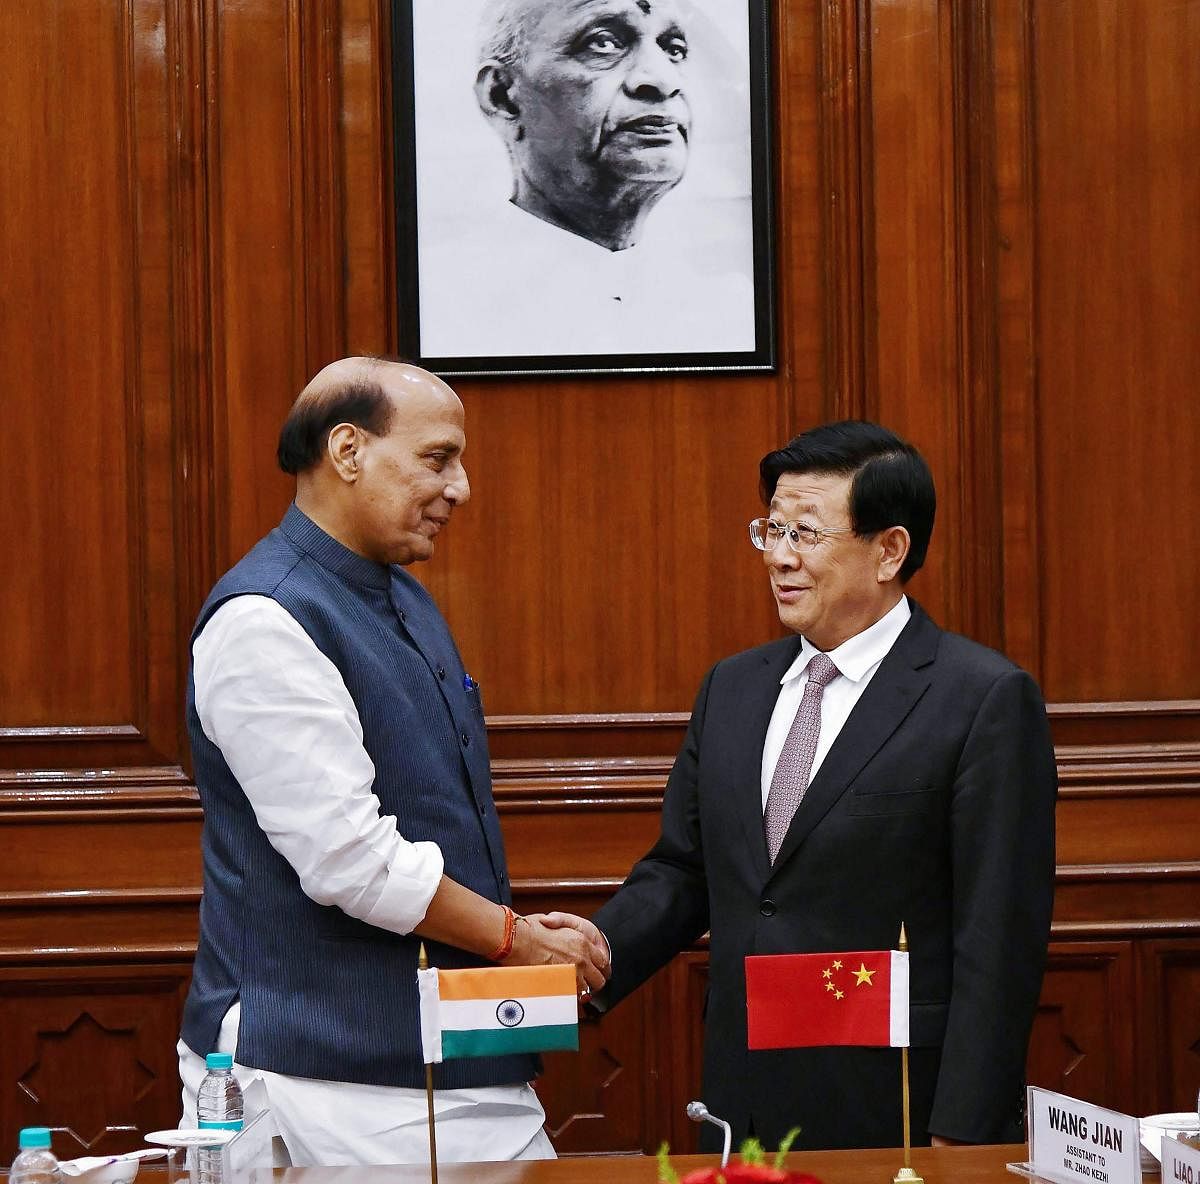 India, China ink security pact